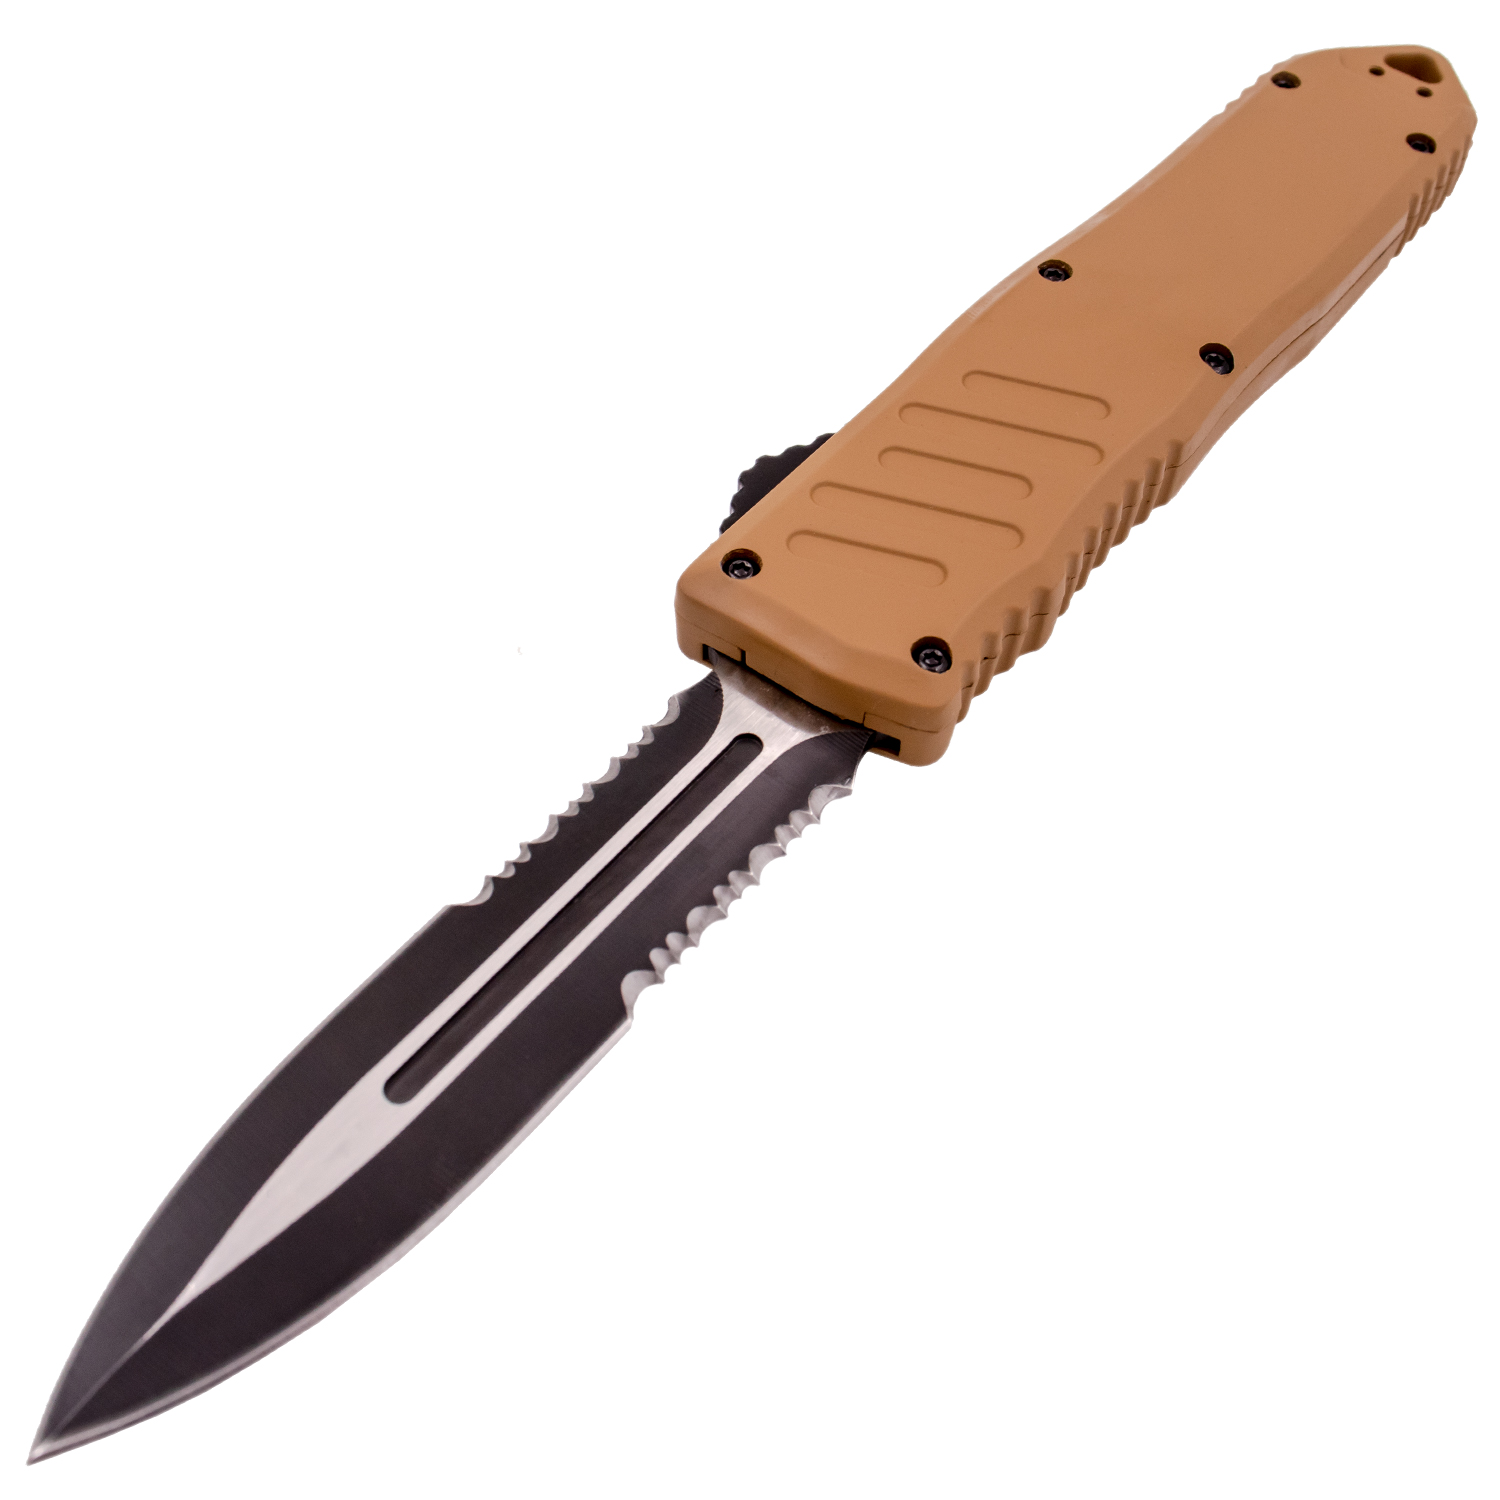 Covert OPS USA OTF Automatic Knife 9 inch Overall D2 Steel Blade Tan